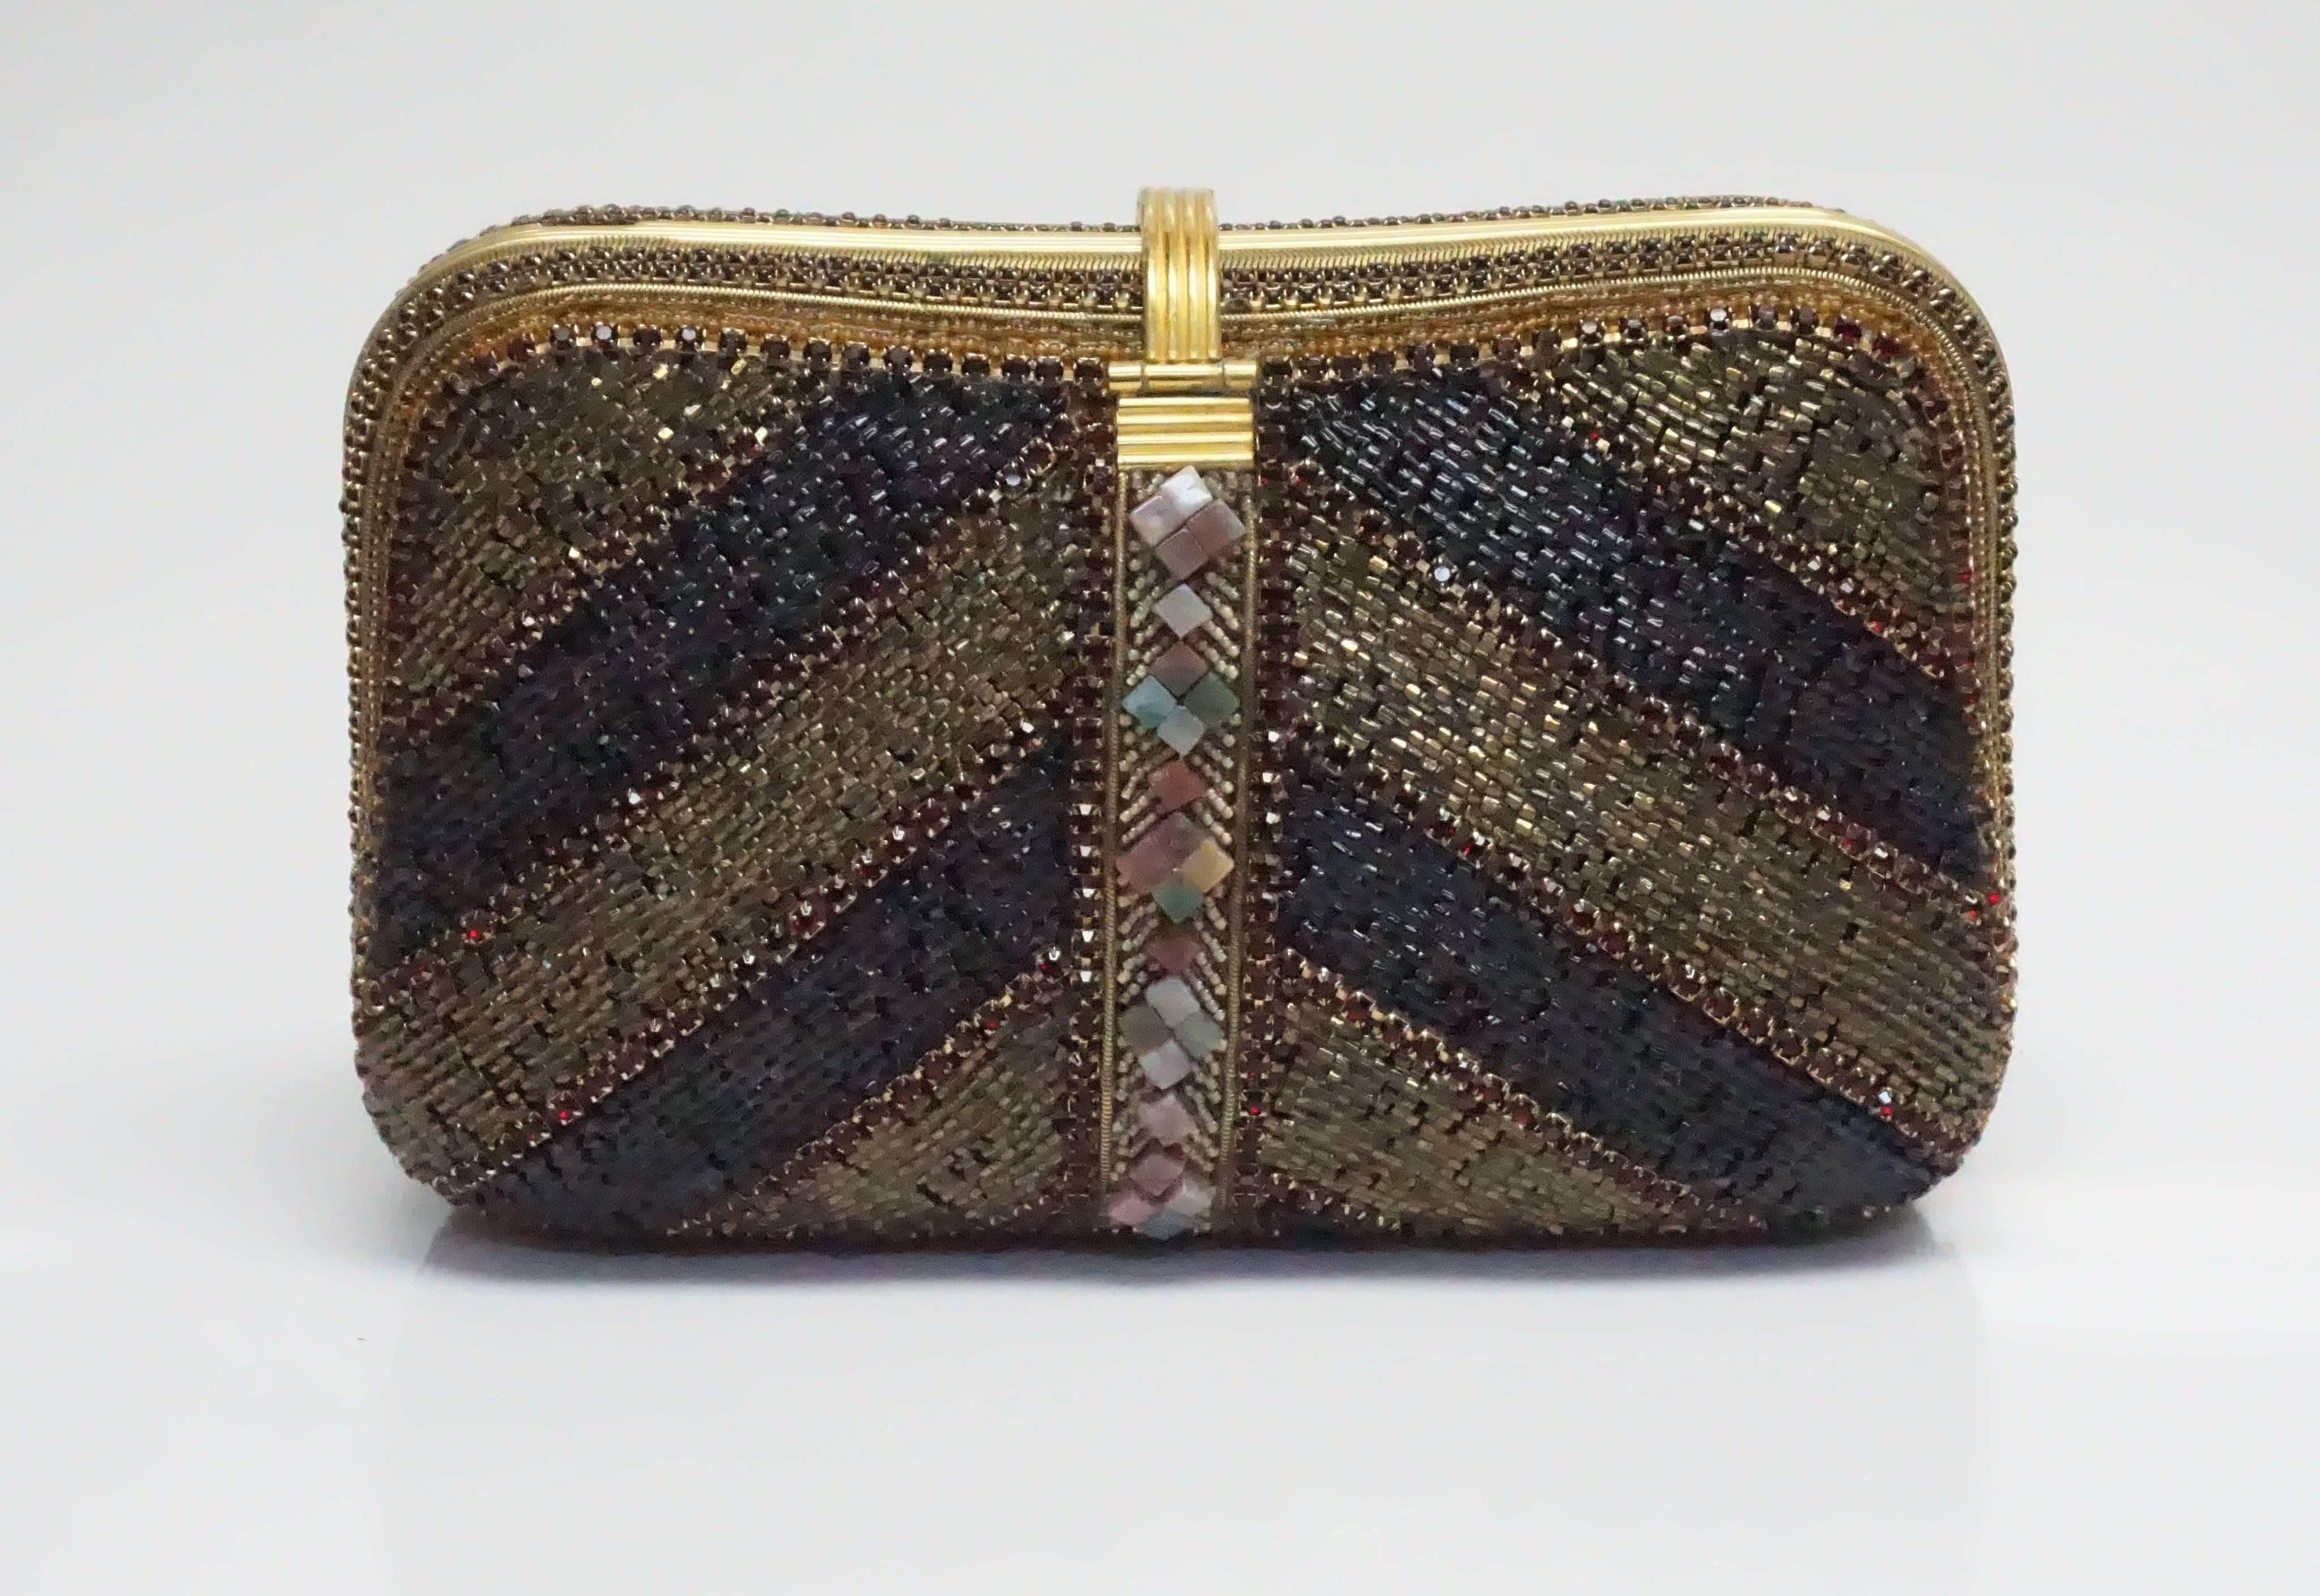 Hansen Designs Vintage Jeweled Clutch  This spectacular vintage piece is completely covered in jewels, beads, and stones. There is gold hardware throughout the clutch. Inside the clutch it is lined with fabric and has a side pocket. This bag can be